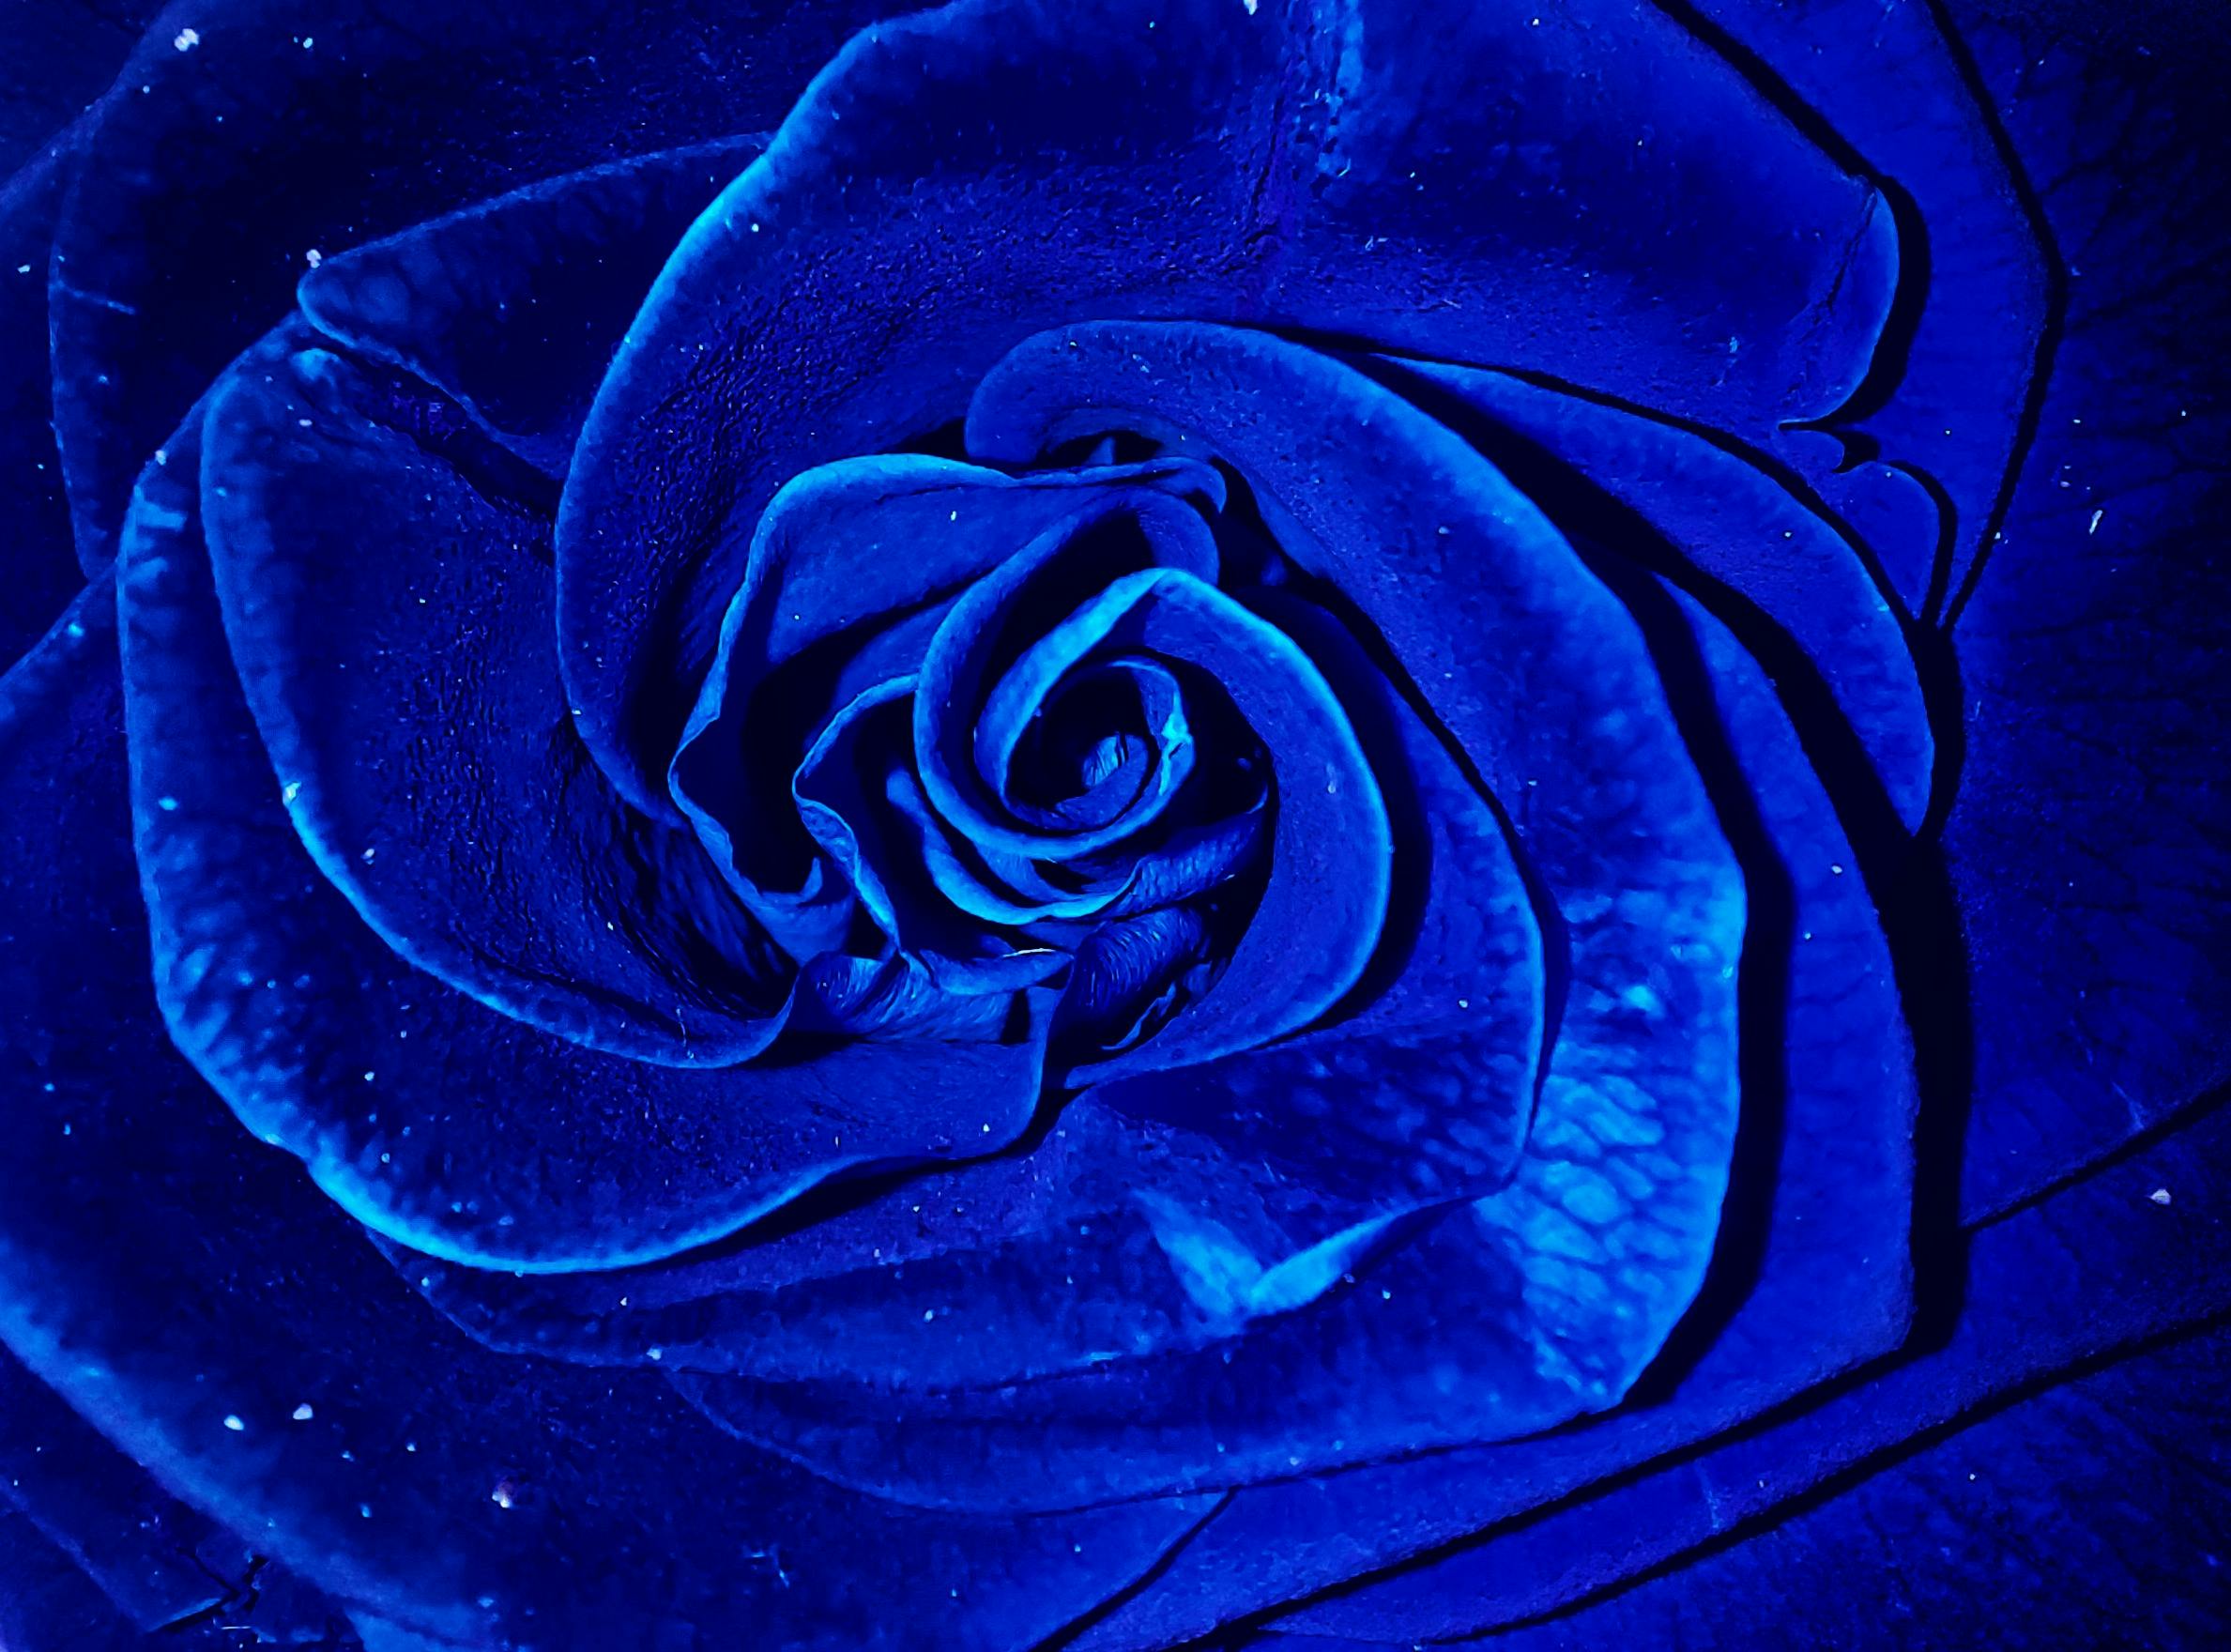 Download wallpapers Blue Rose neon icon, 4k, blue background, neon symbols, Blue  Rose, neon icons, Blue Rose sign, neon flowers, nature signs, Blue Rose  icon, nature icons for desktop with resolution 3840x2400.